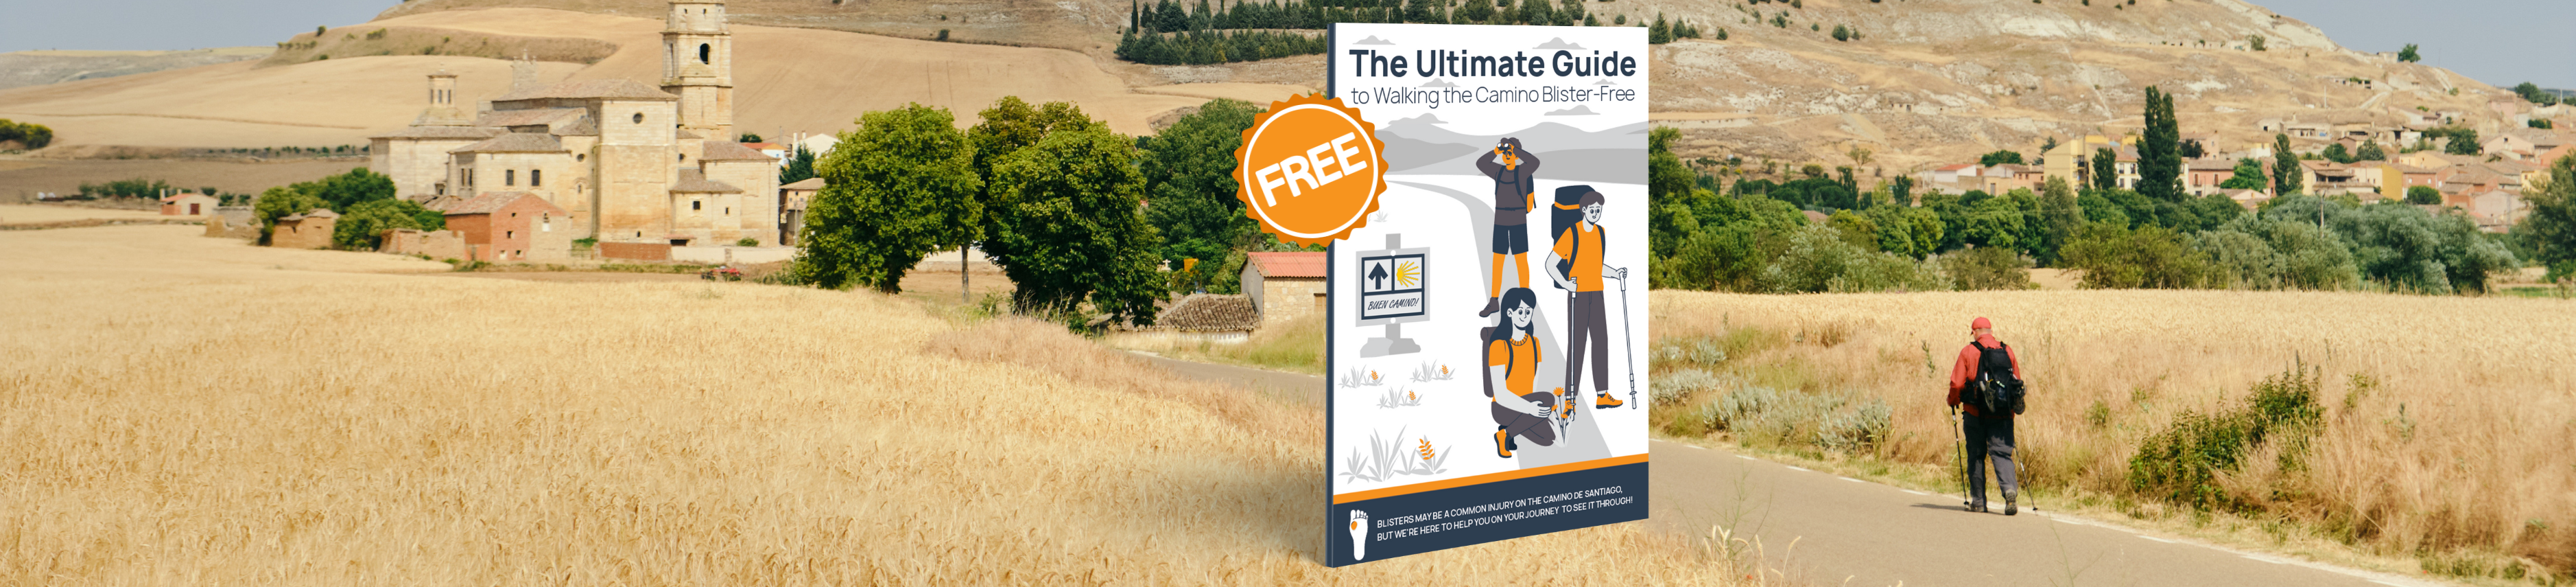 The Ultimate Guide to Walking the Camino Blister Free Landscape Banner